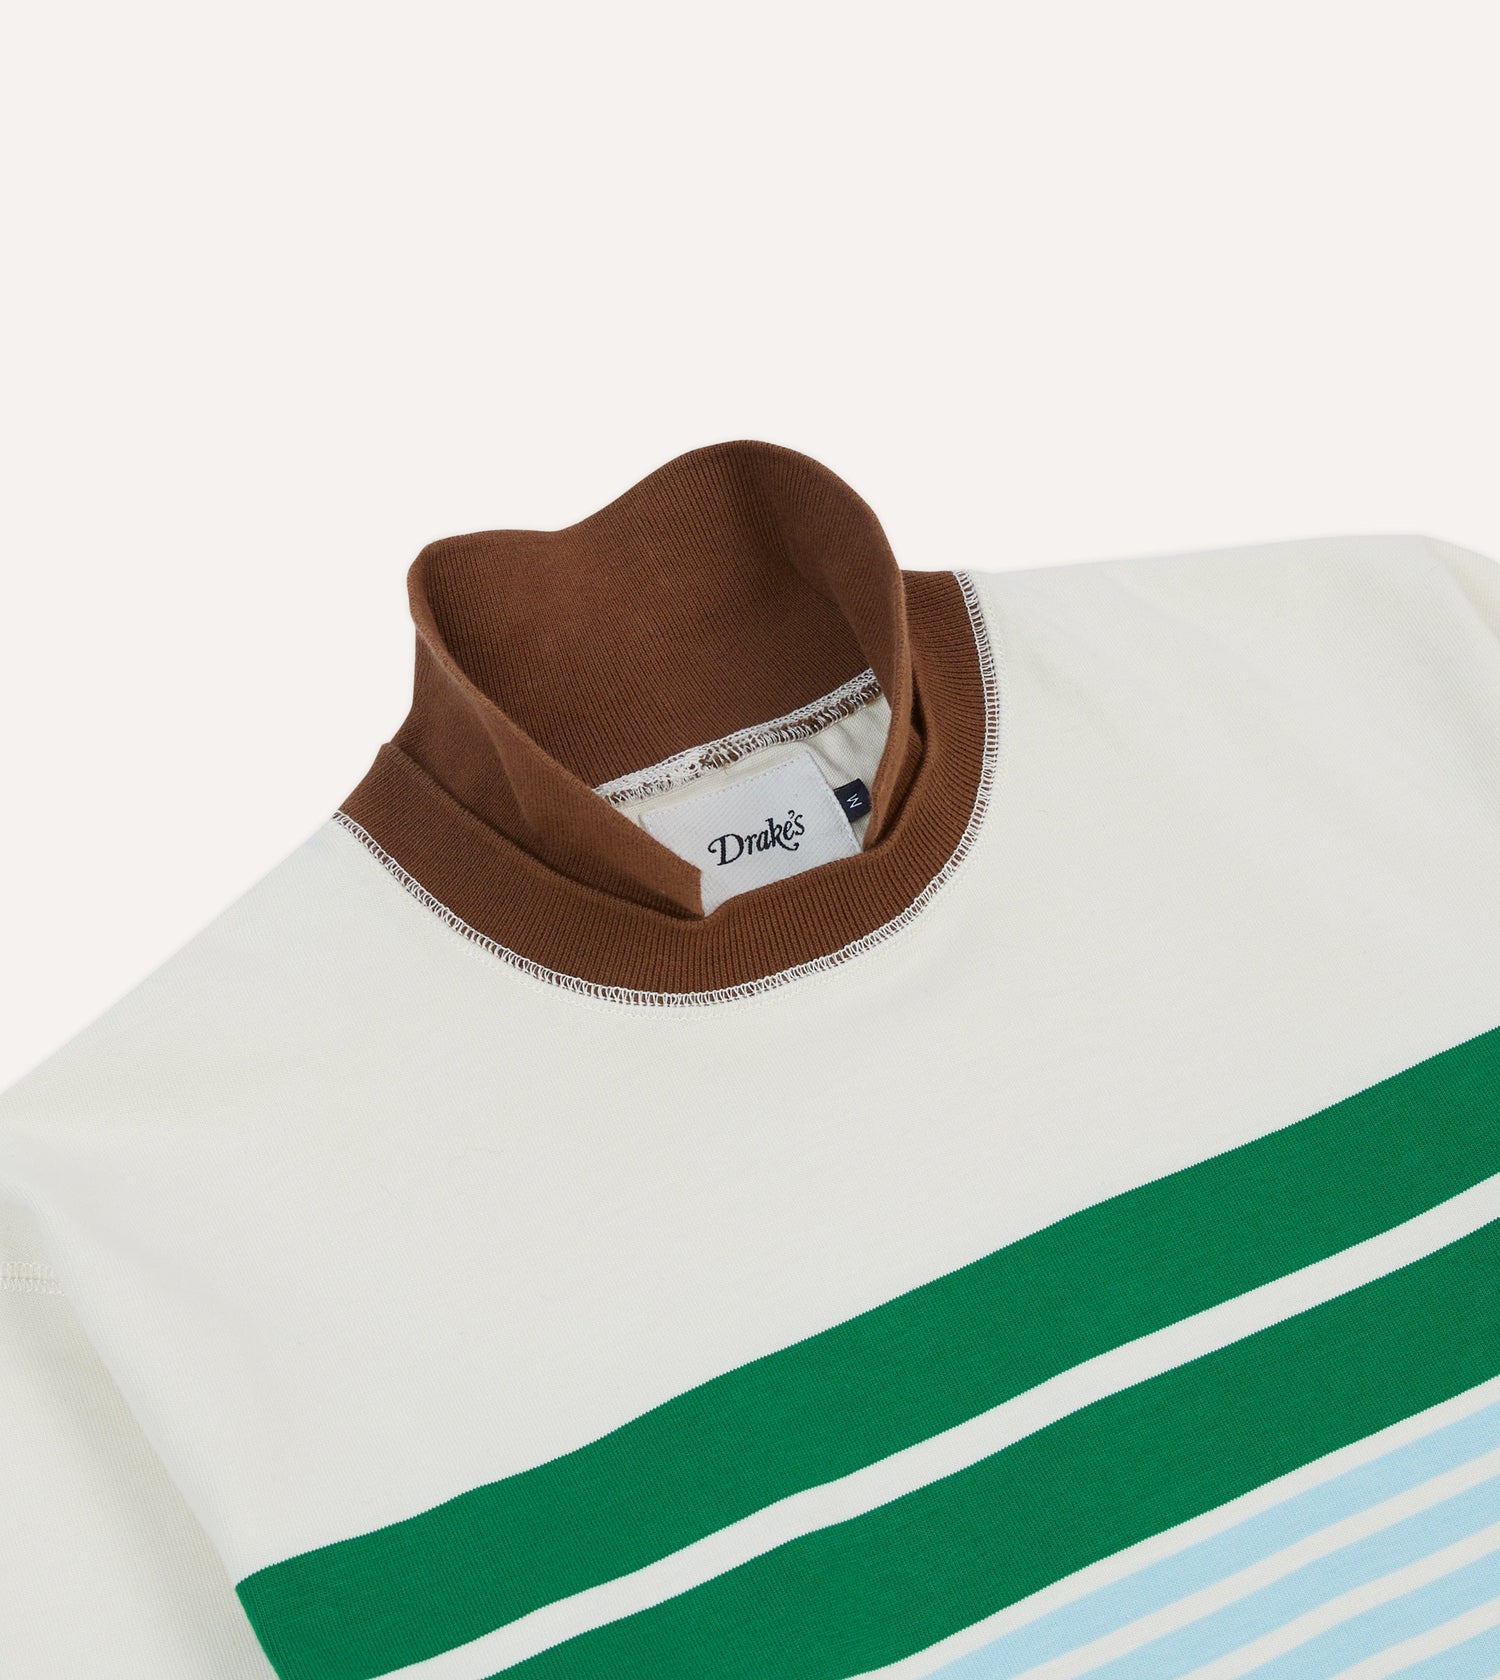 White, Green and Blue Centre Stripe Mock Collar Long-Sleeve Jersey